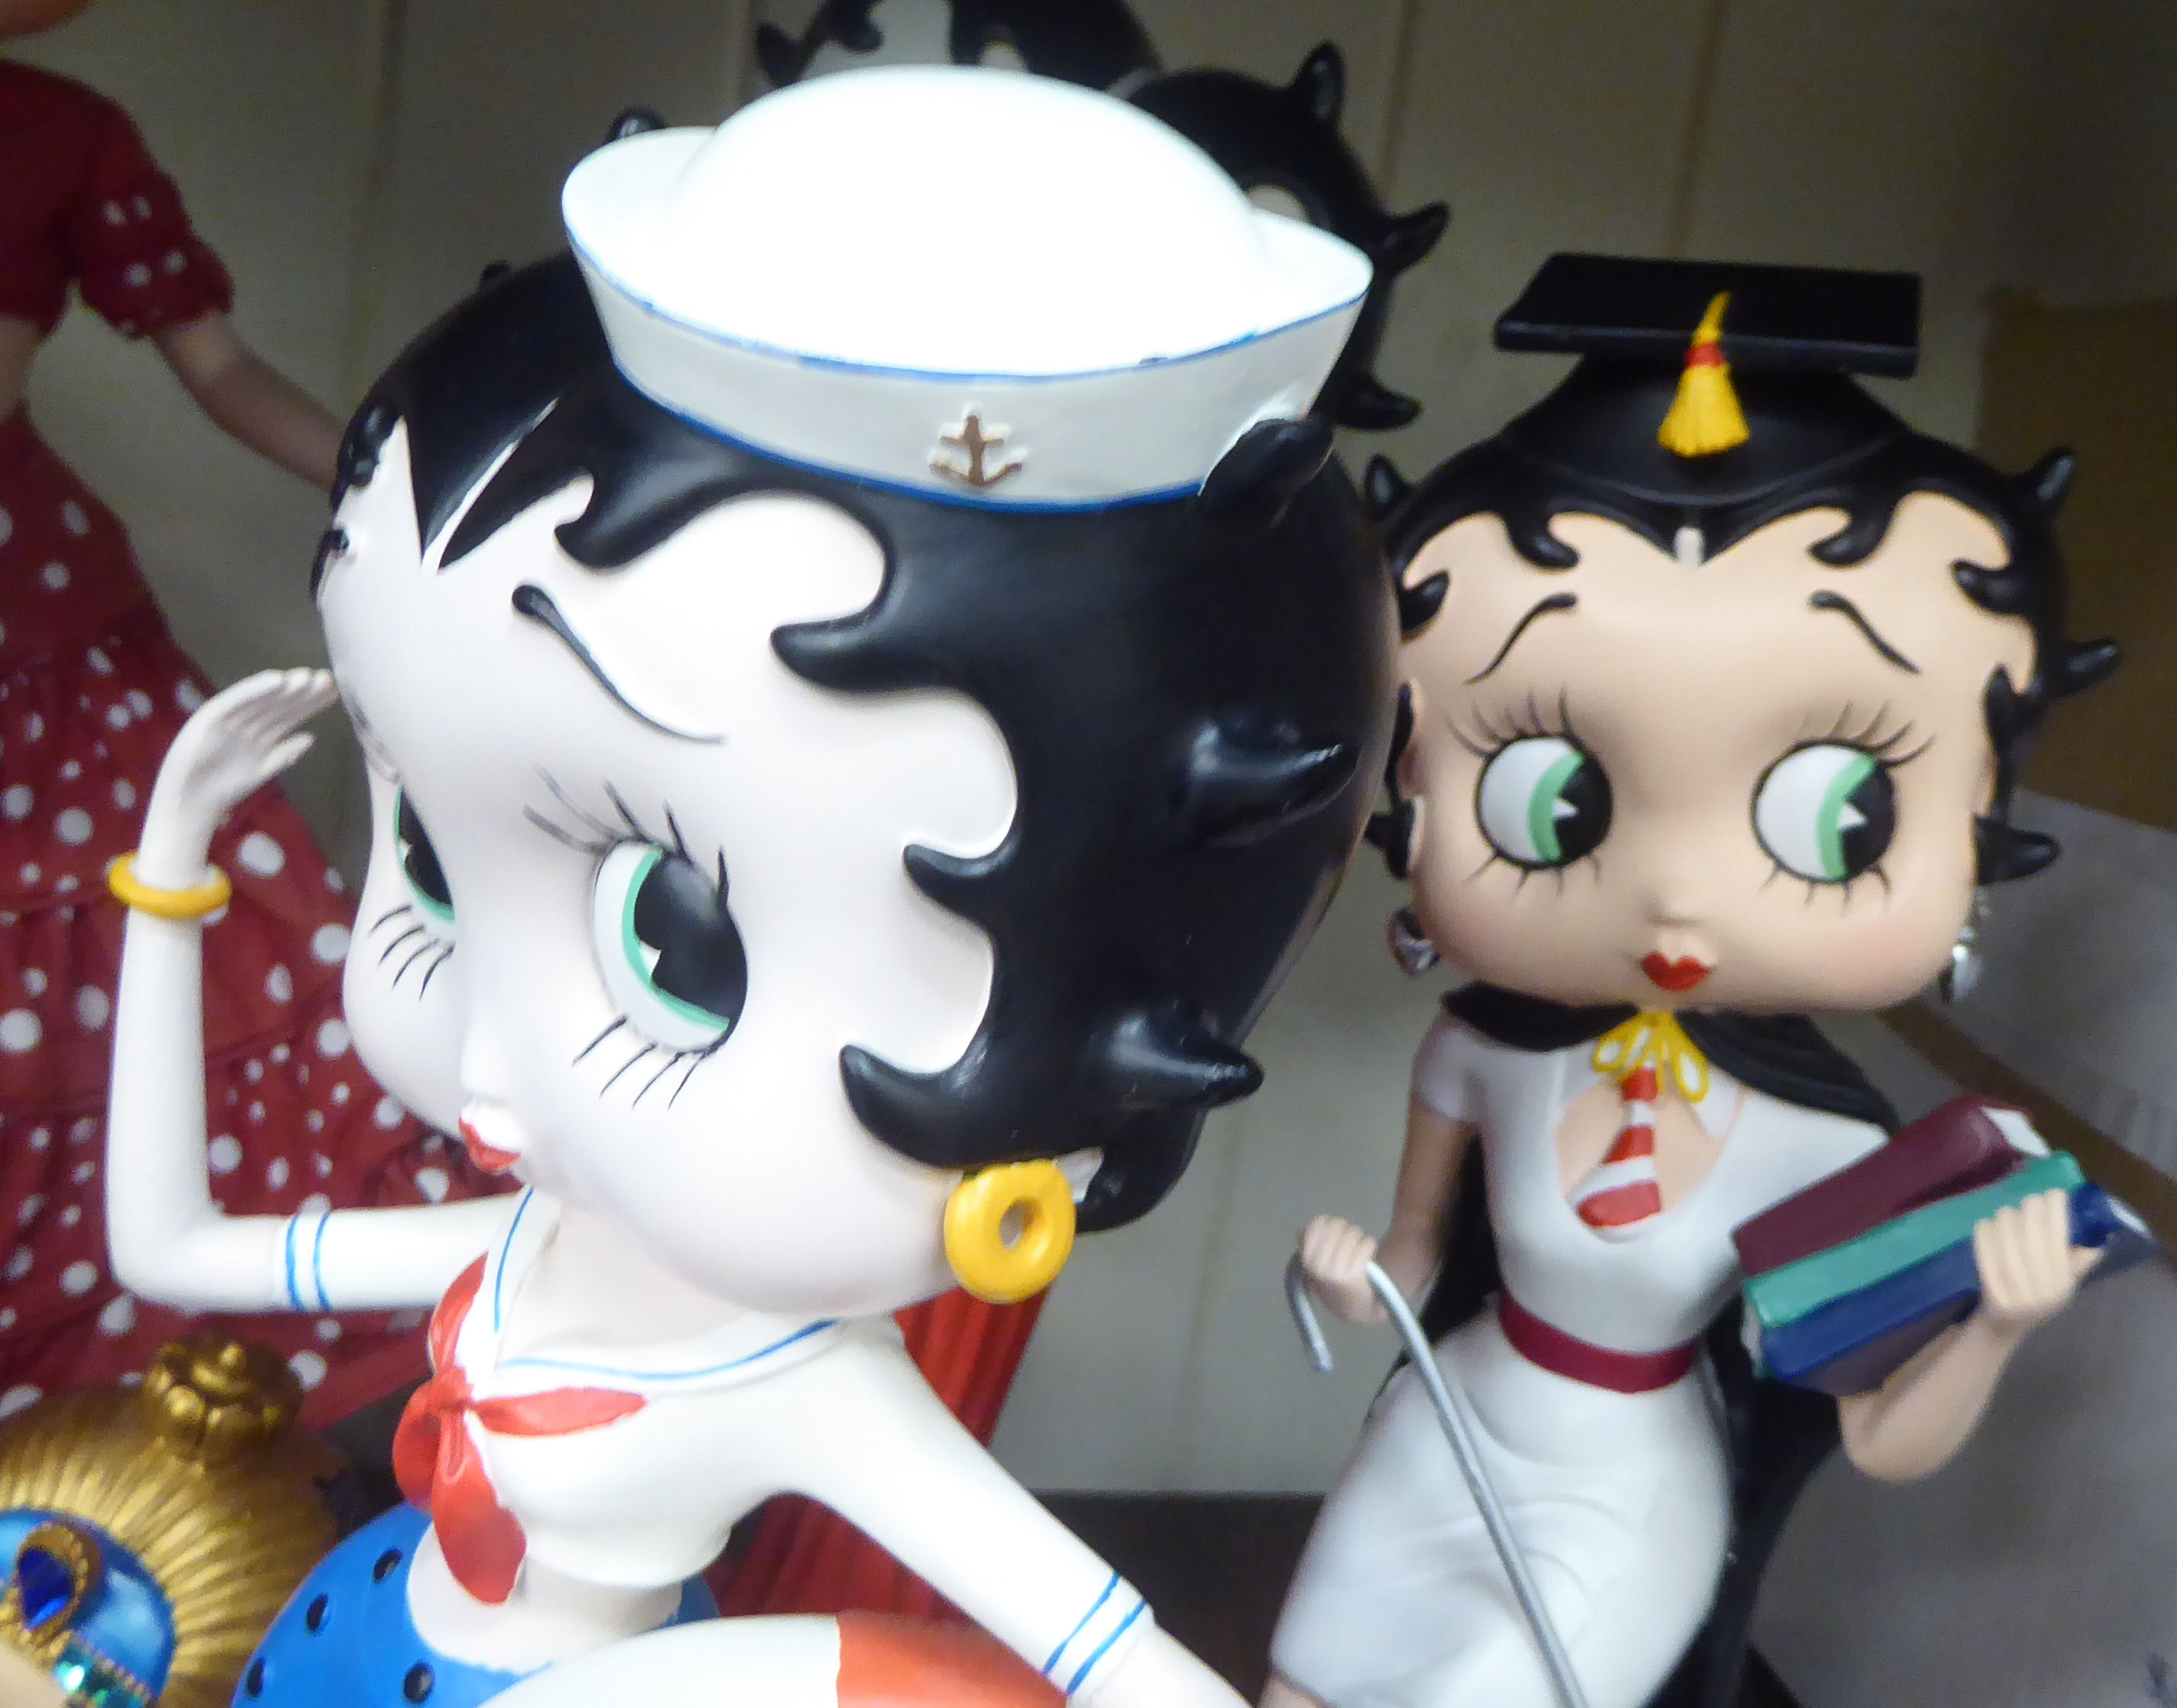 Betty Boop porcelain and composition figures, wearing various costumes  6"-12"h - Image 4 of 6